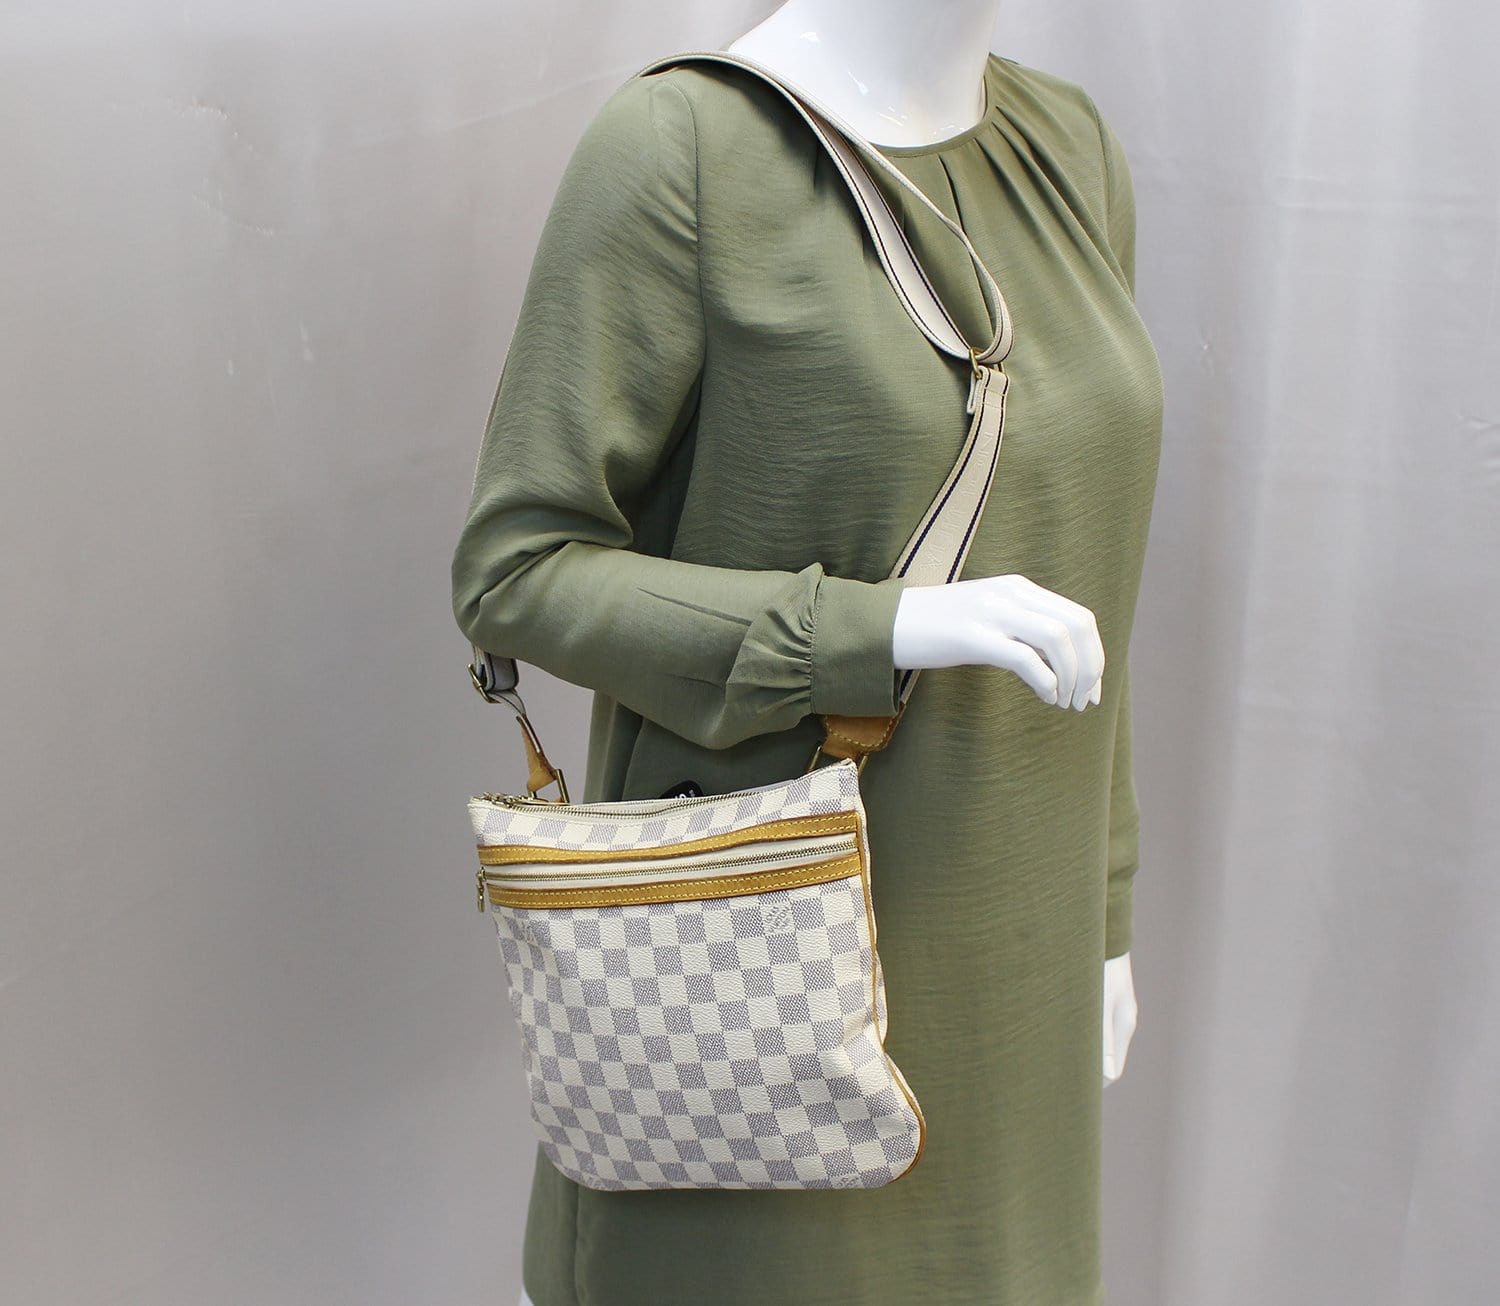 Louis Vuitton Pre-Owned Louis Vuitton Handbags in Pre-Owned